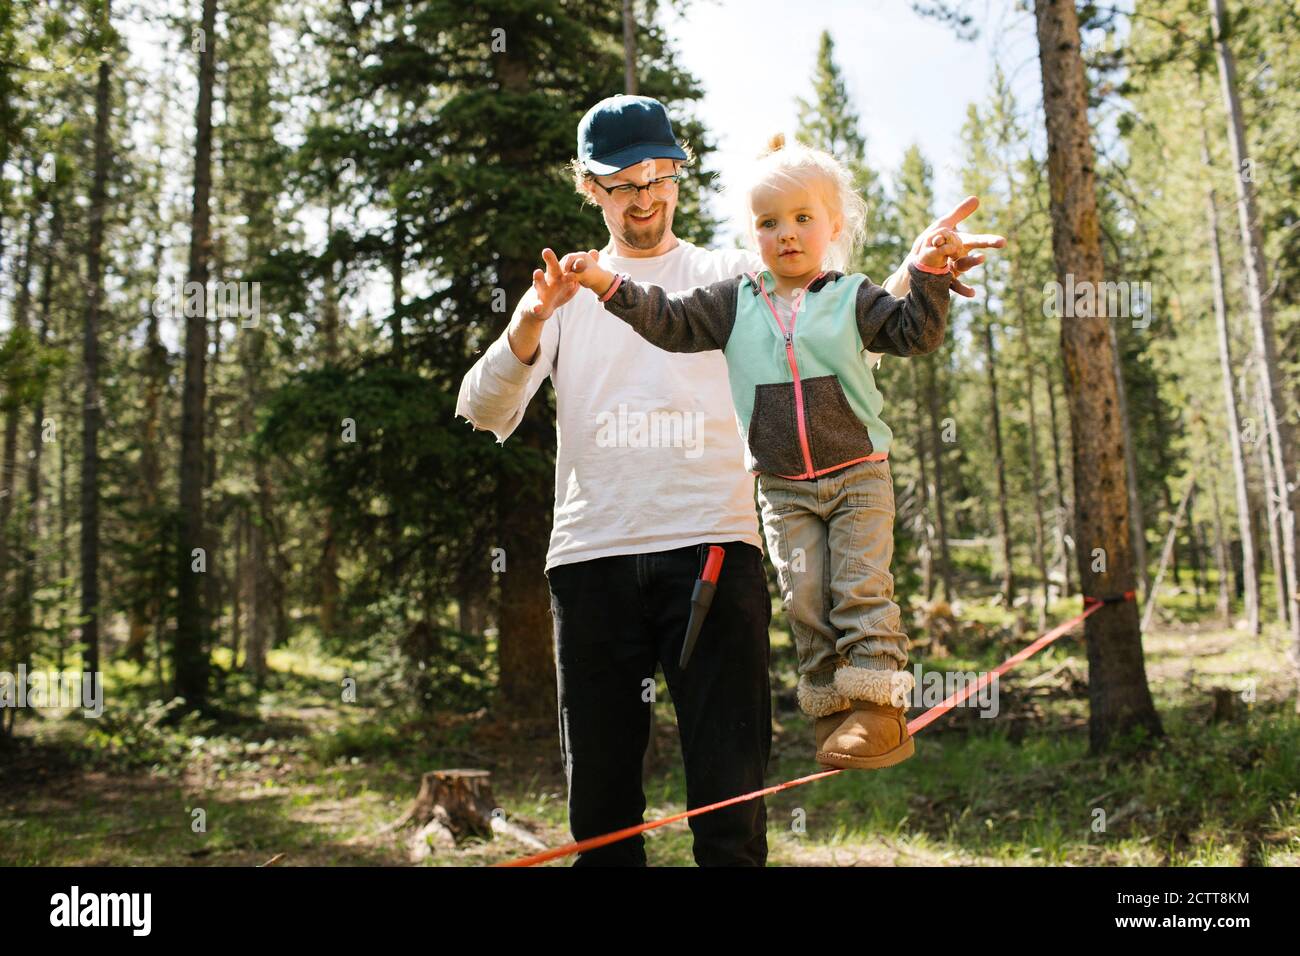 Father assisting daughter (2-3) walking on slackline in forest, Wasatch-Cache National Forest Stock Photo